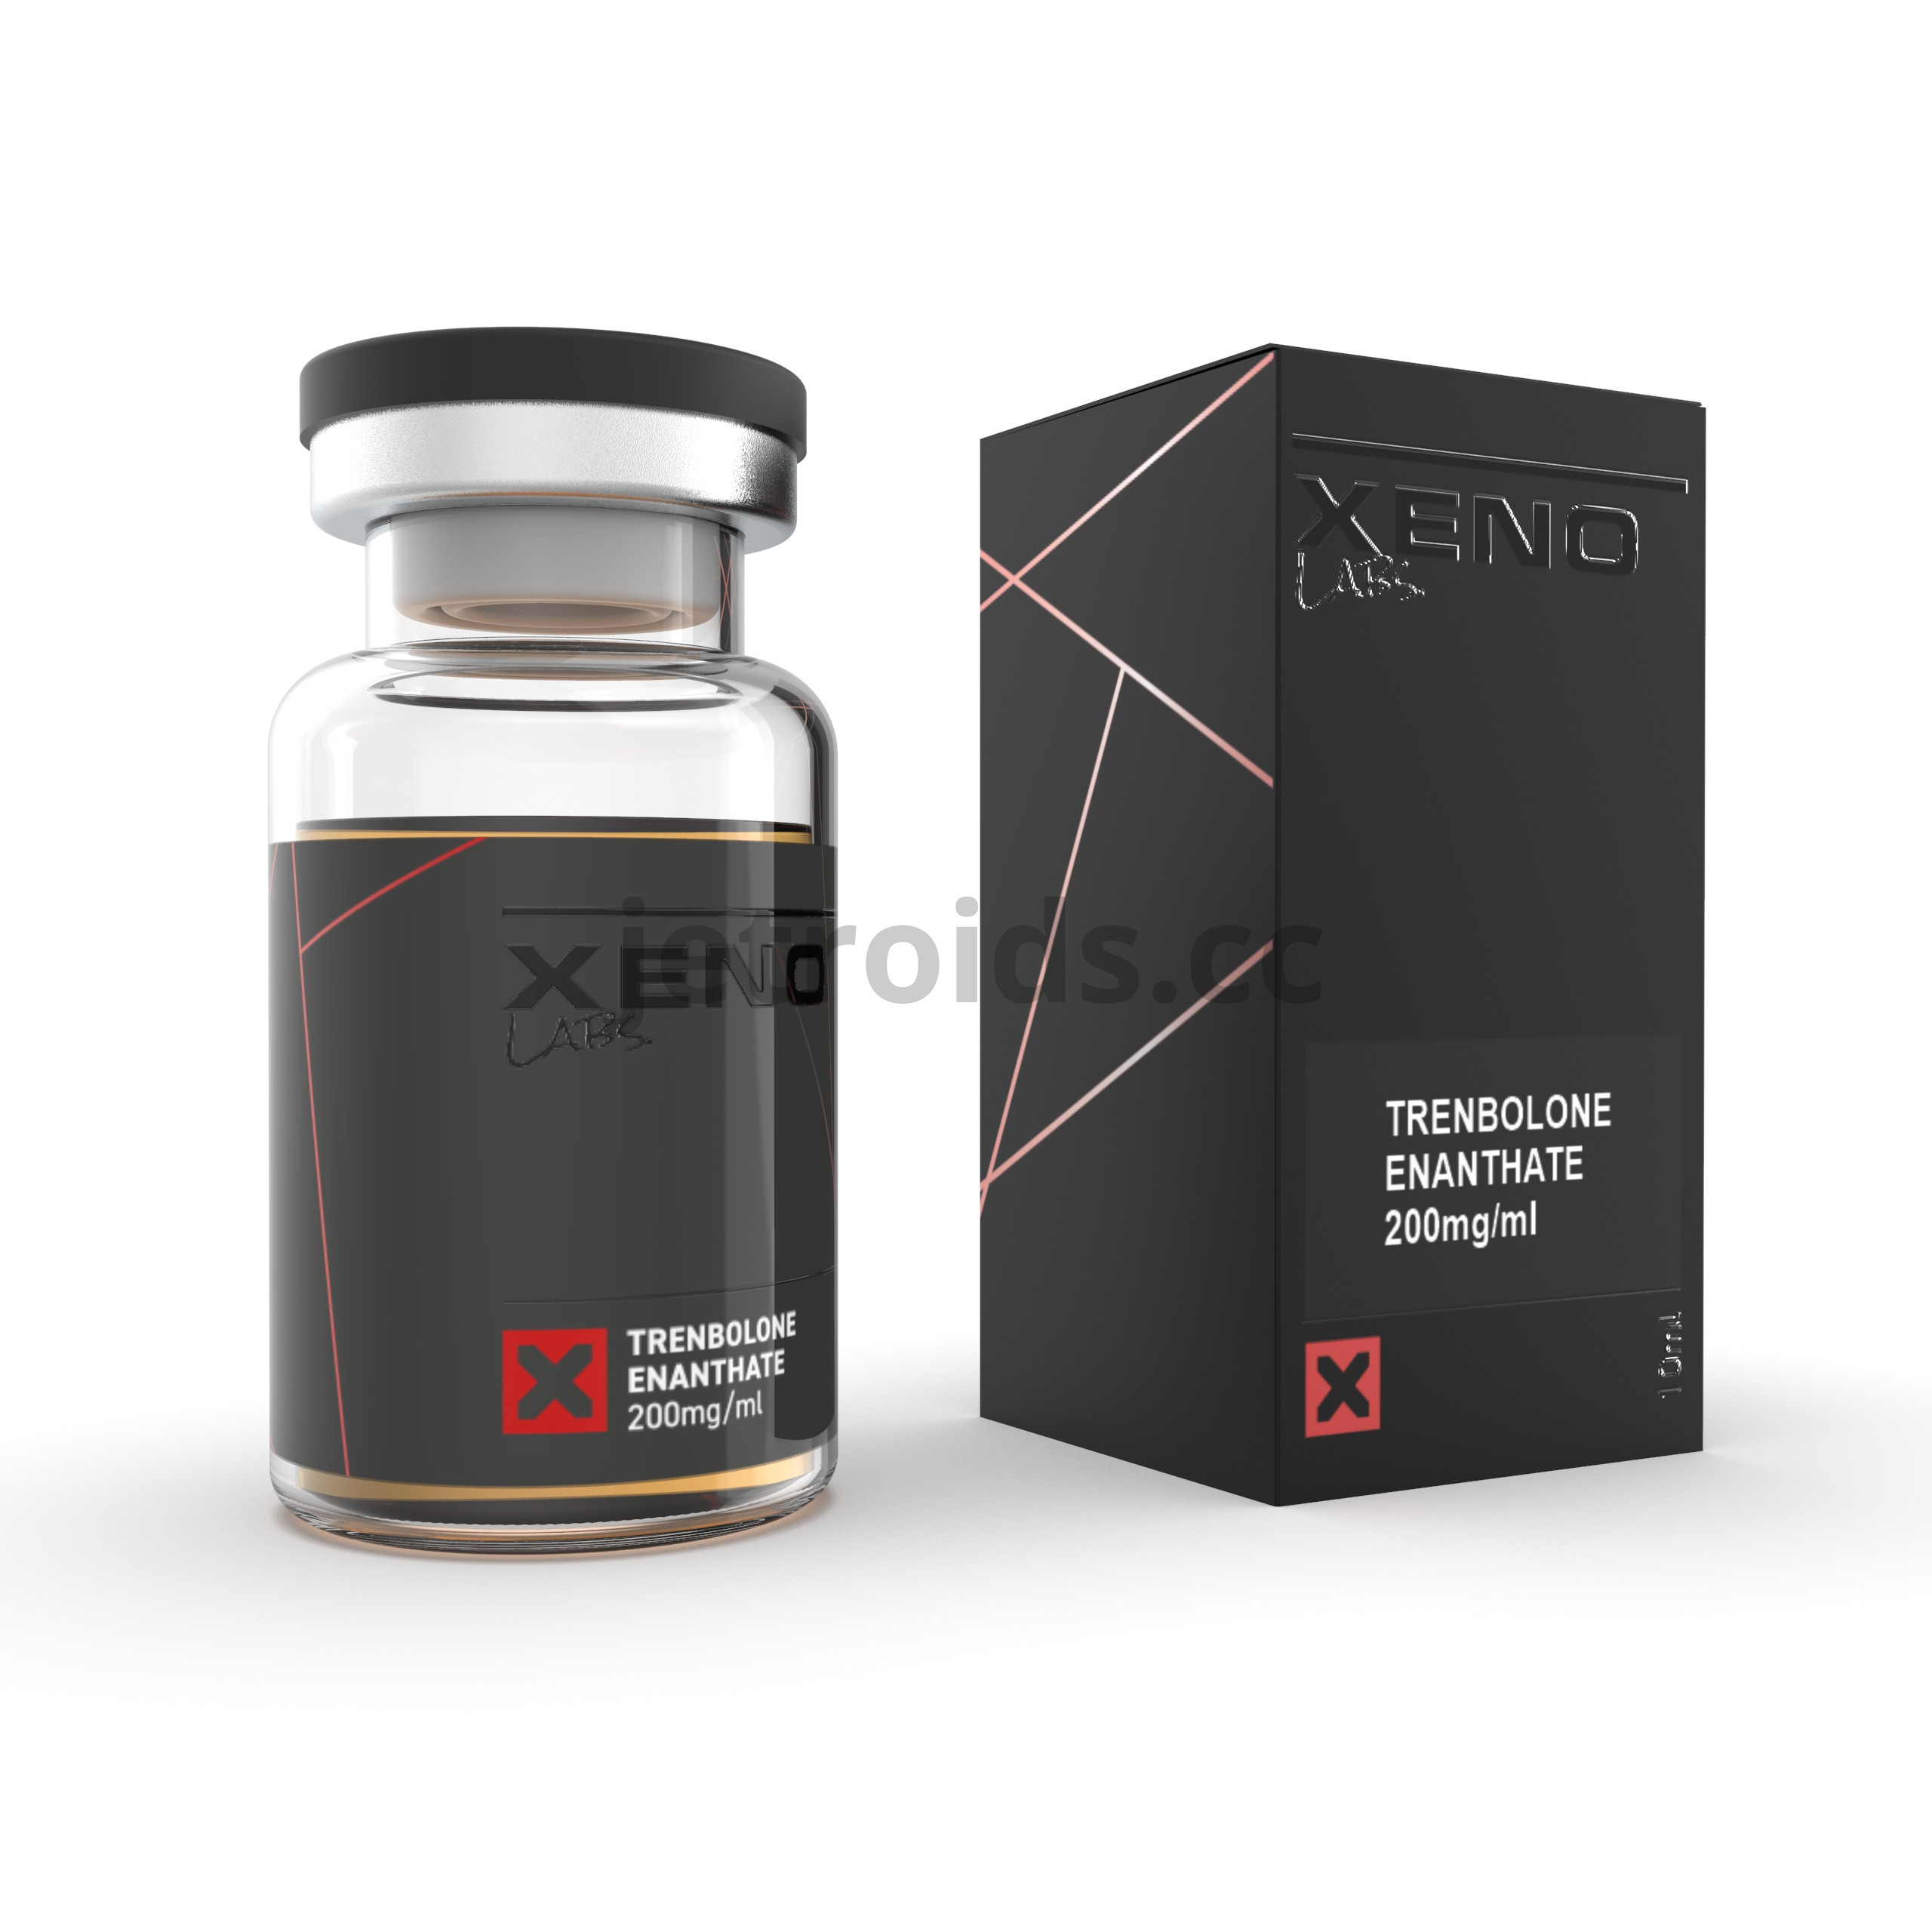 Xeno Labs - US Trenbolone Enanthate 200 Product Info